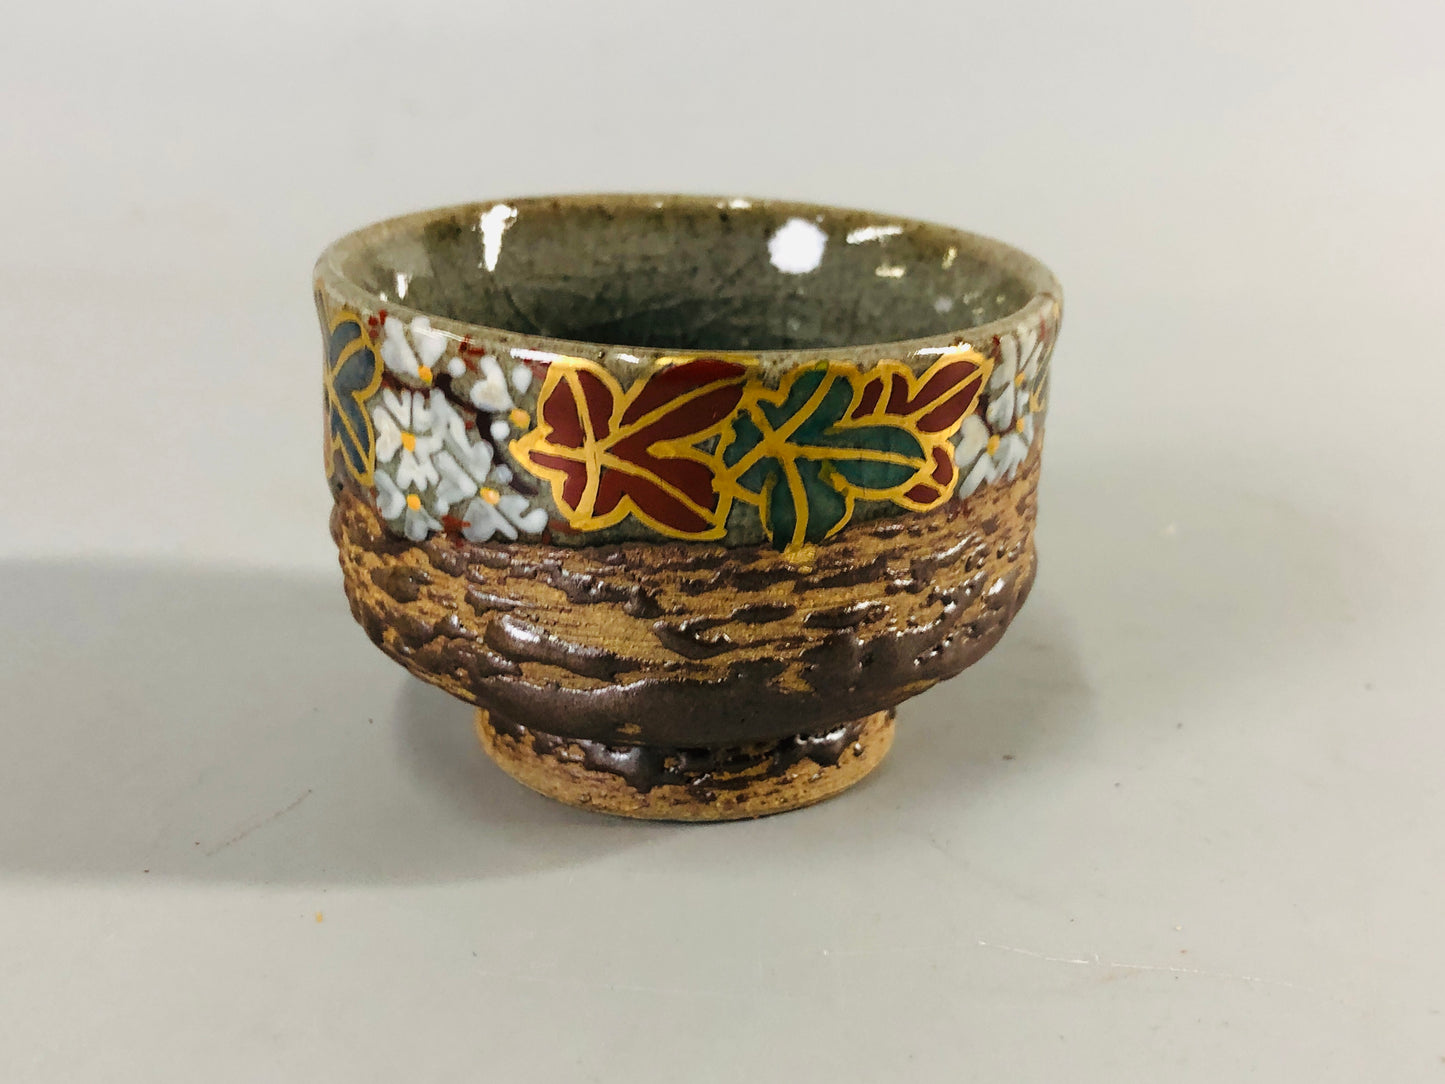 Y6914 [VIDEO] CHAWAN Inuyama-ware Sake cup signed box autumn leaves Japan antique